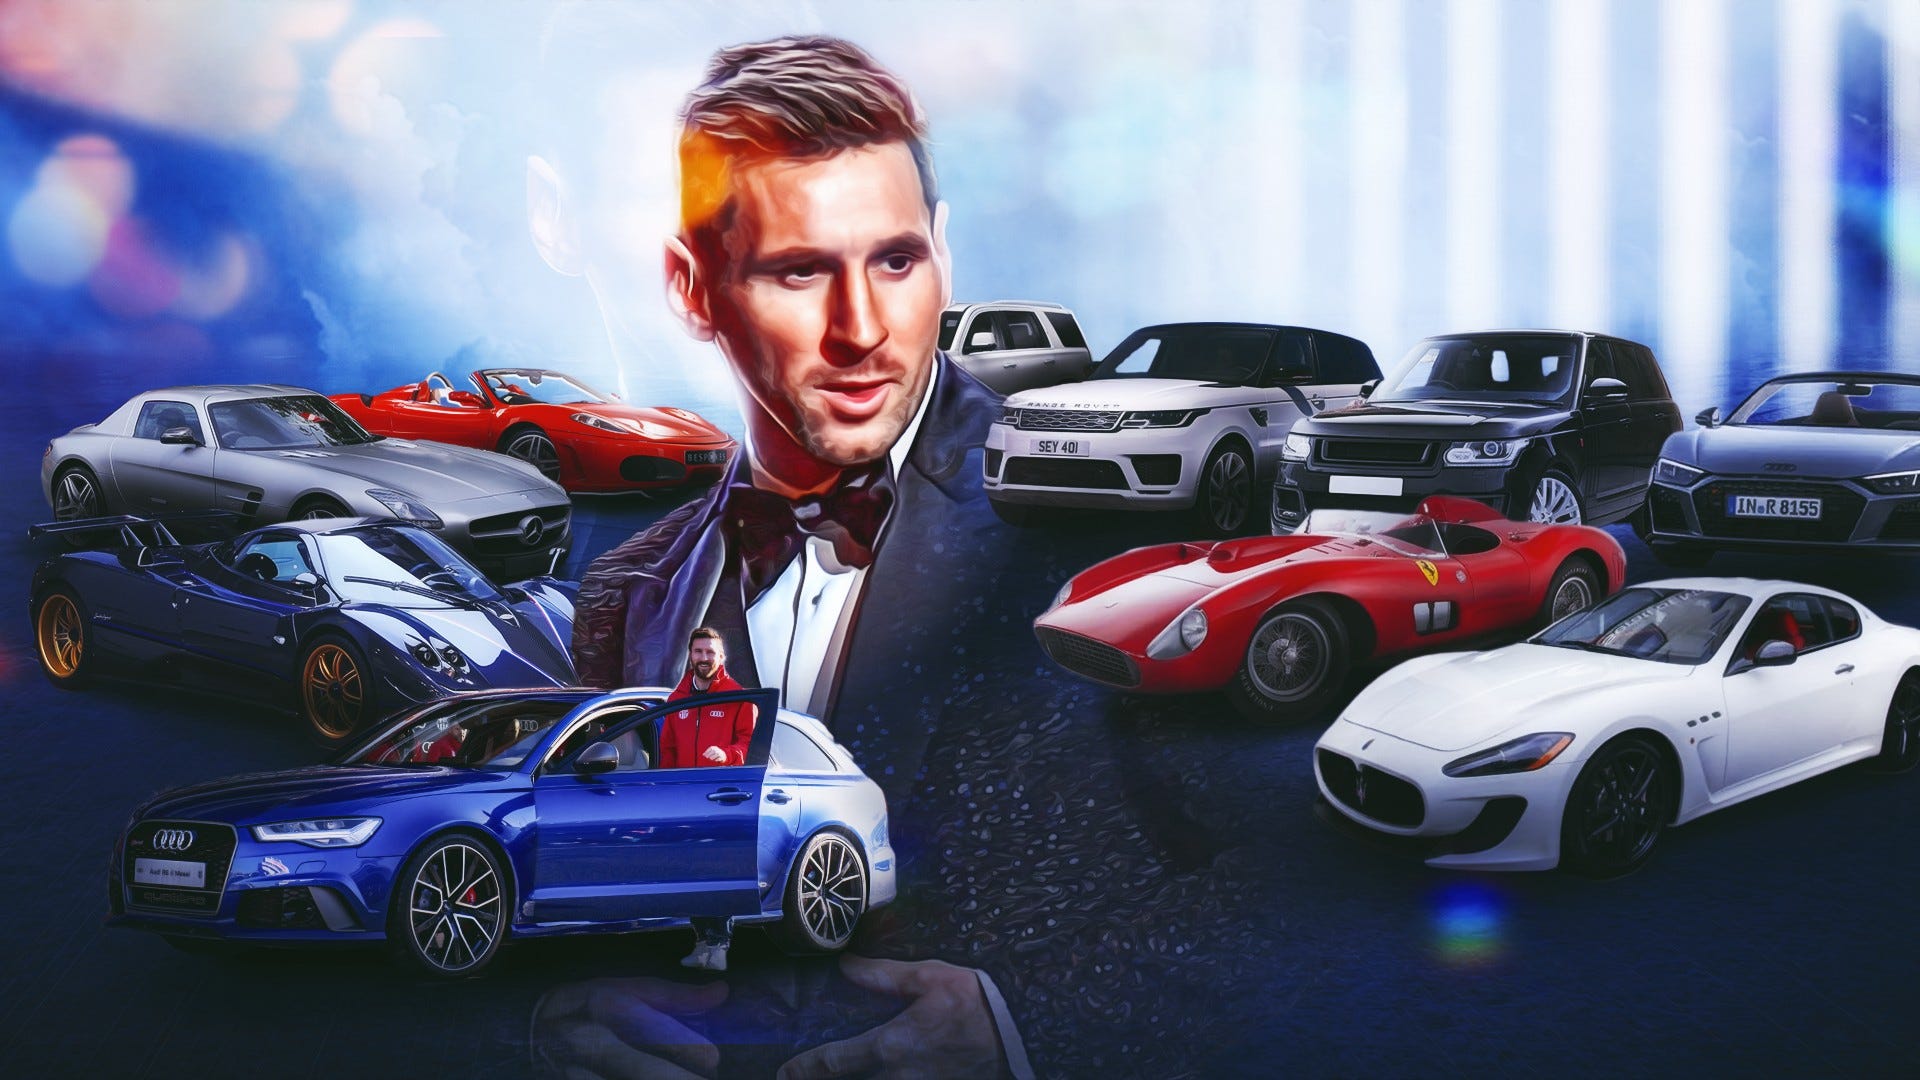 How many cars does Messi have?